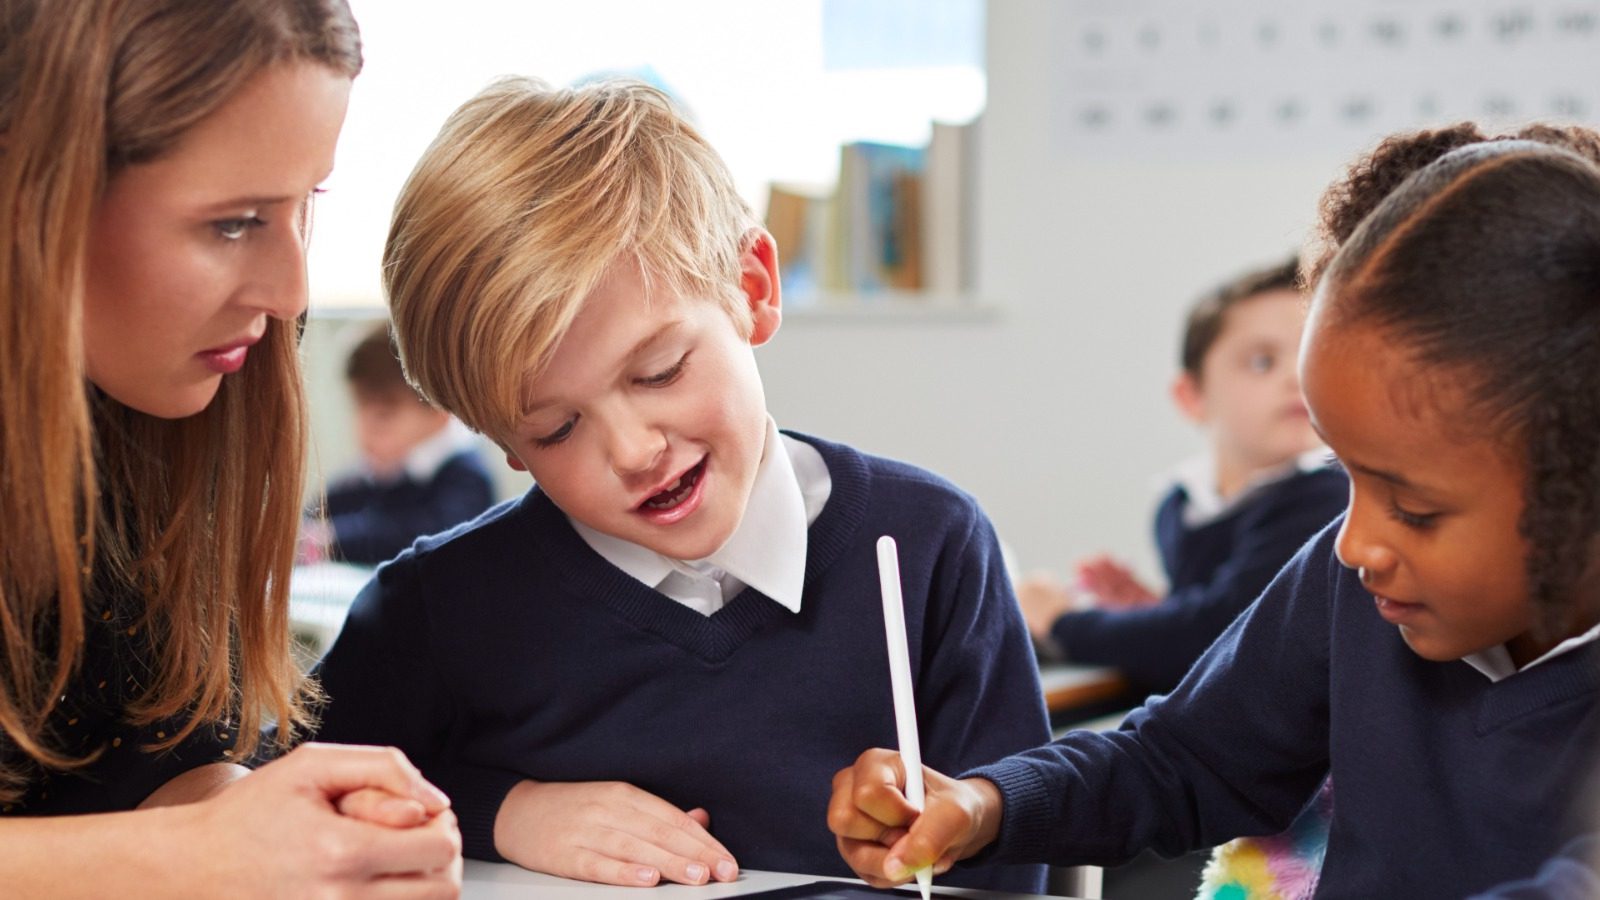 It All Adds Up: Dorset Primary School Announces New Partnership To Help Pupils Succeed in Maths